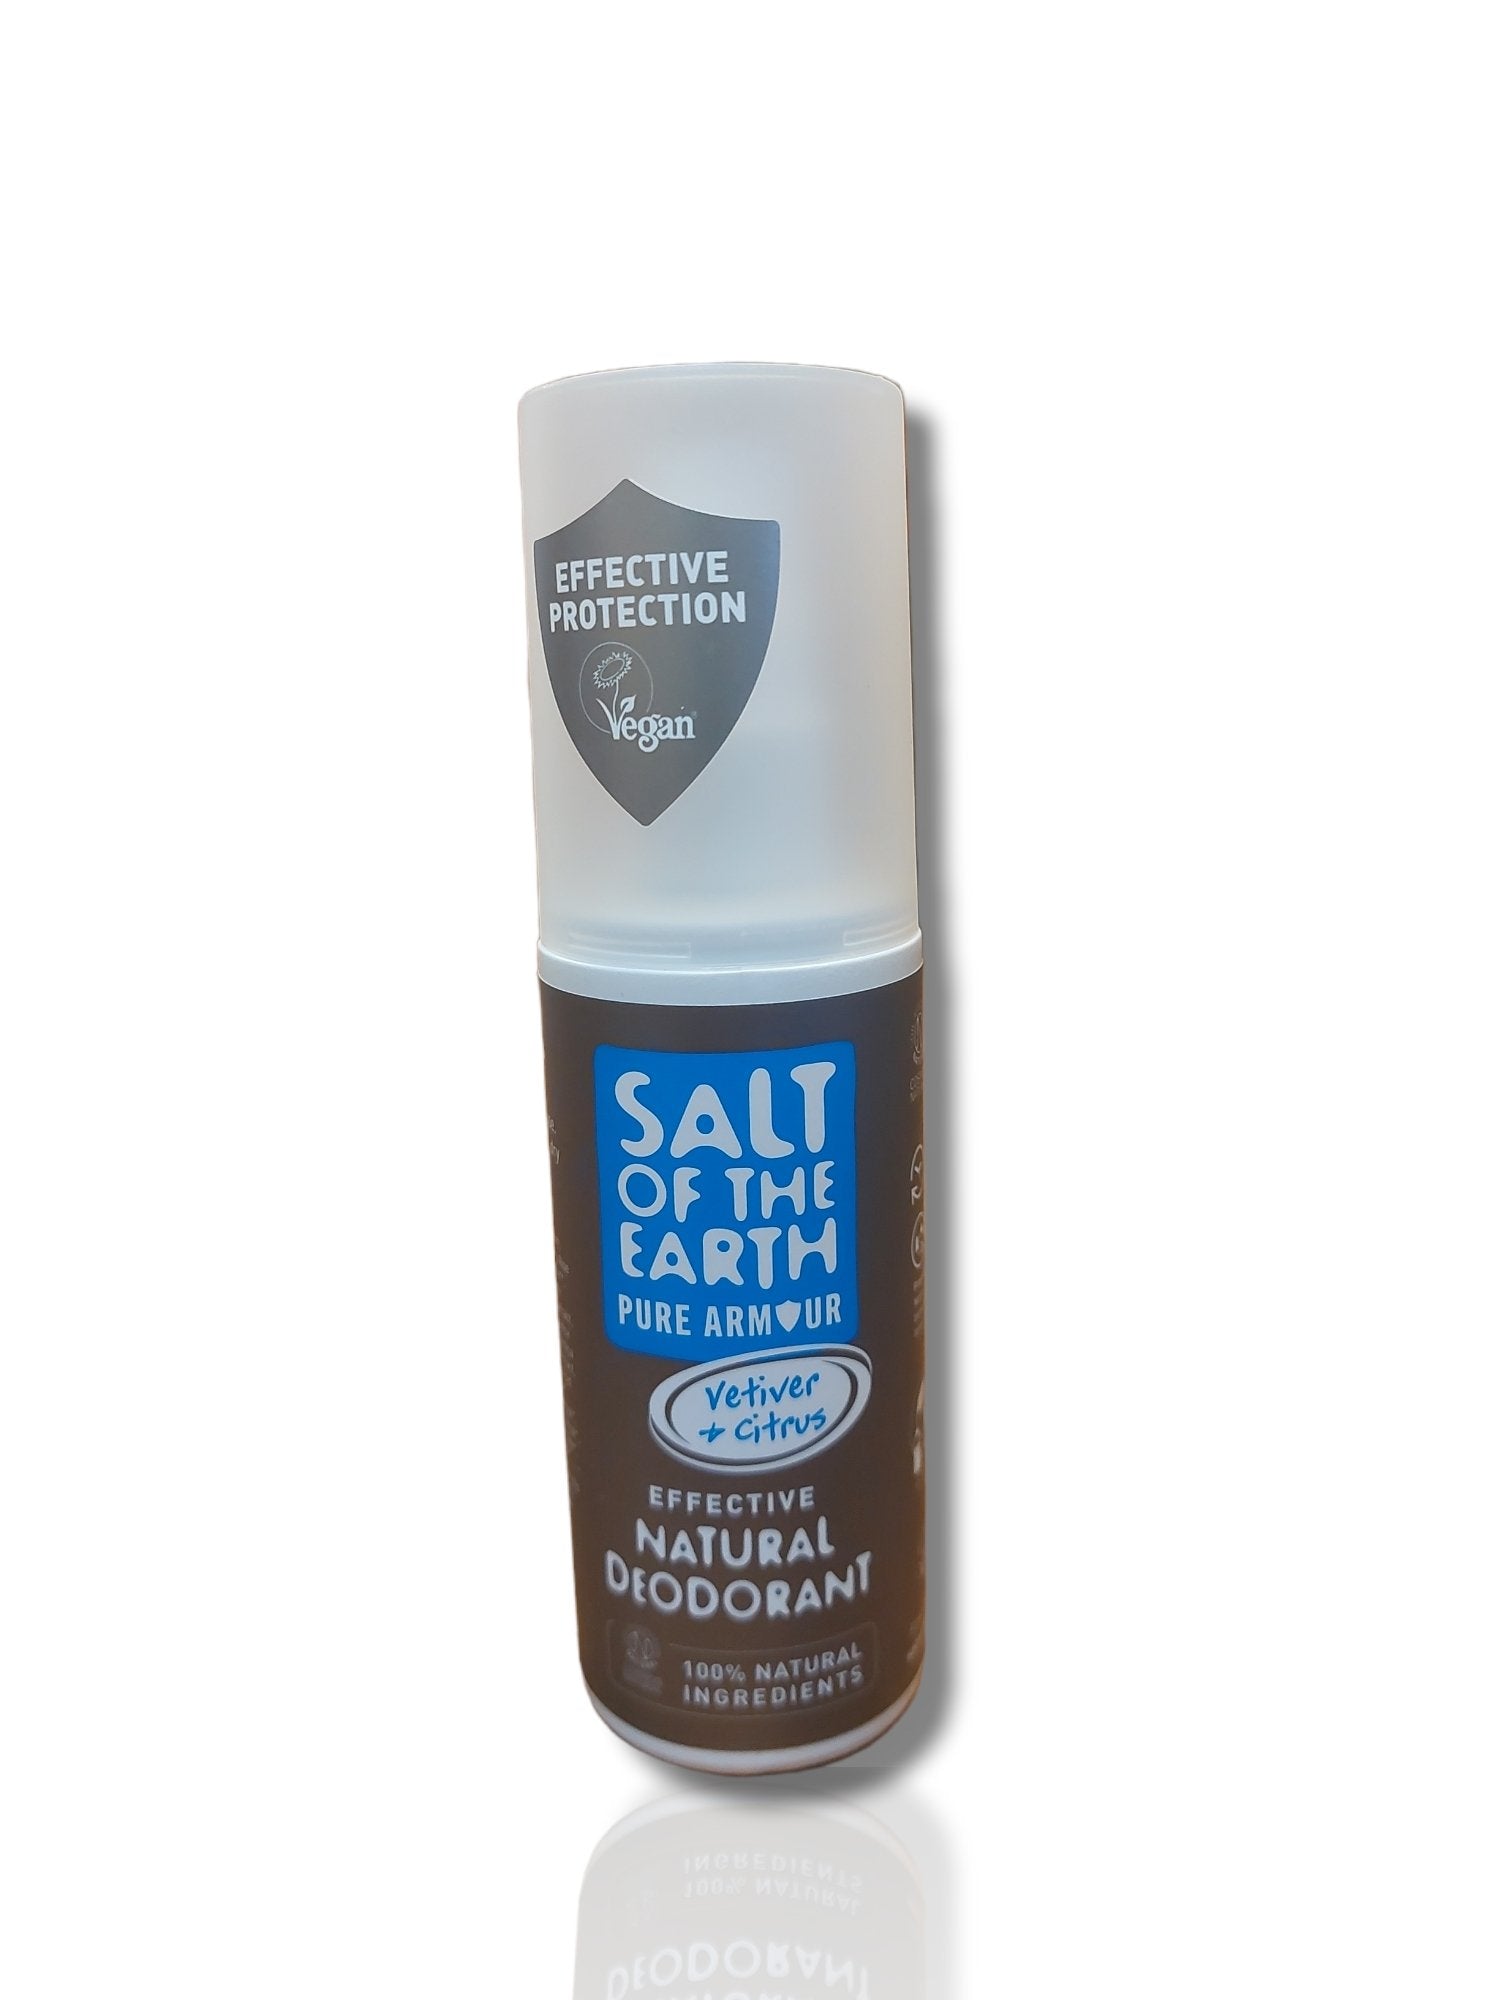 Salt of the Earth Natural Deodorant - HealthyLiving.ie